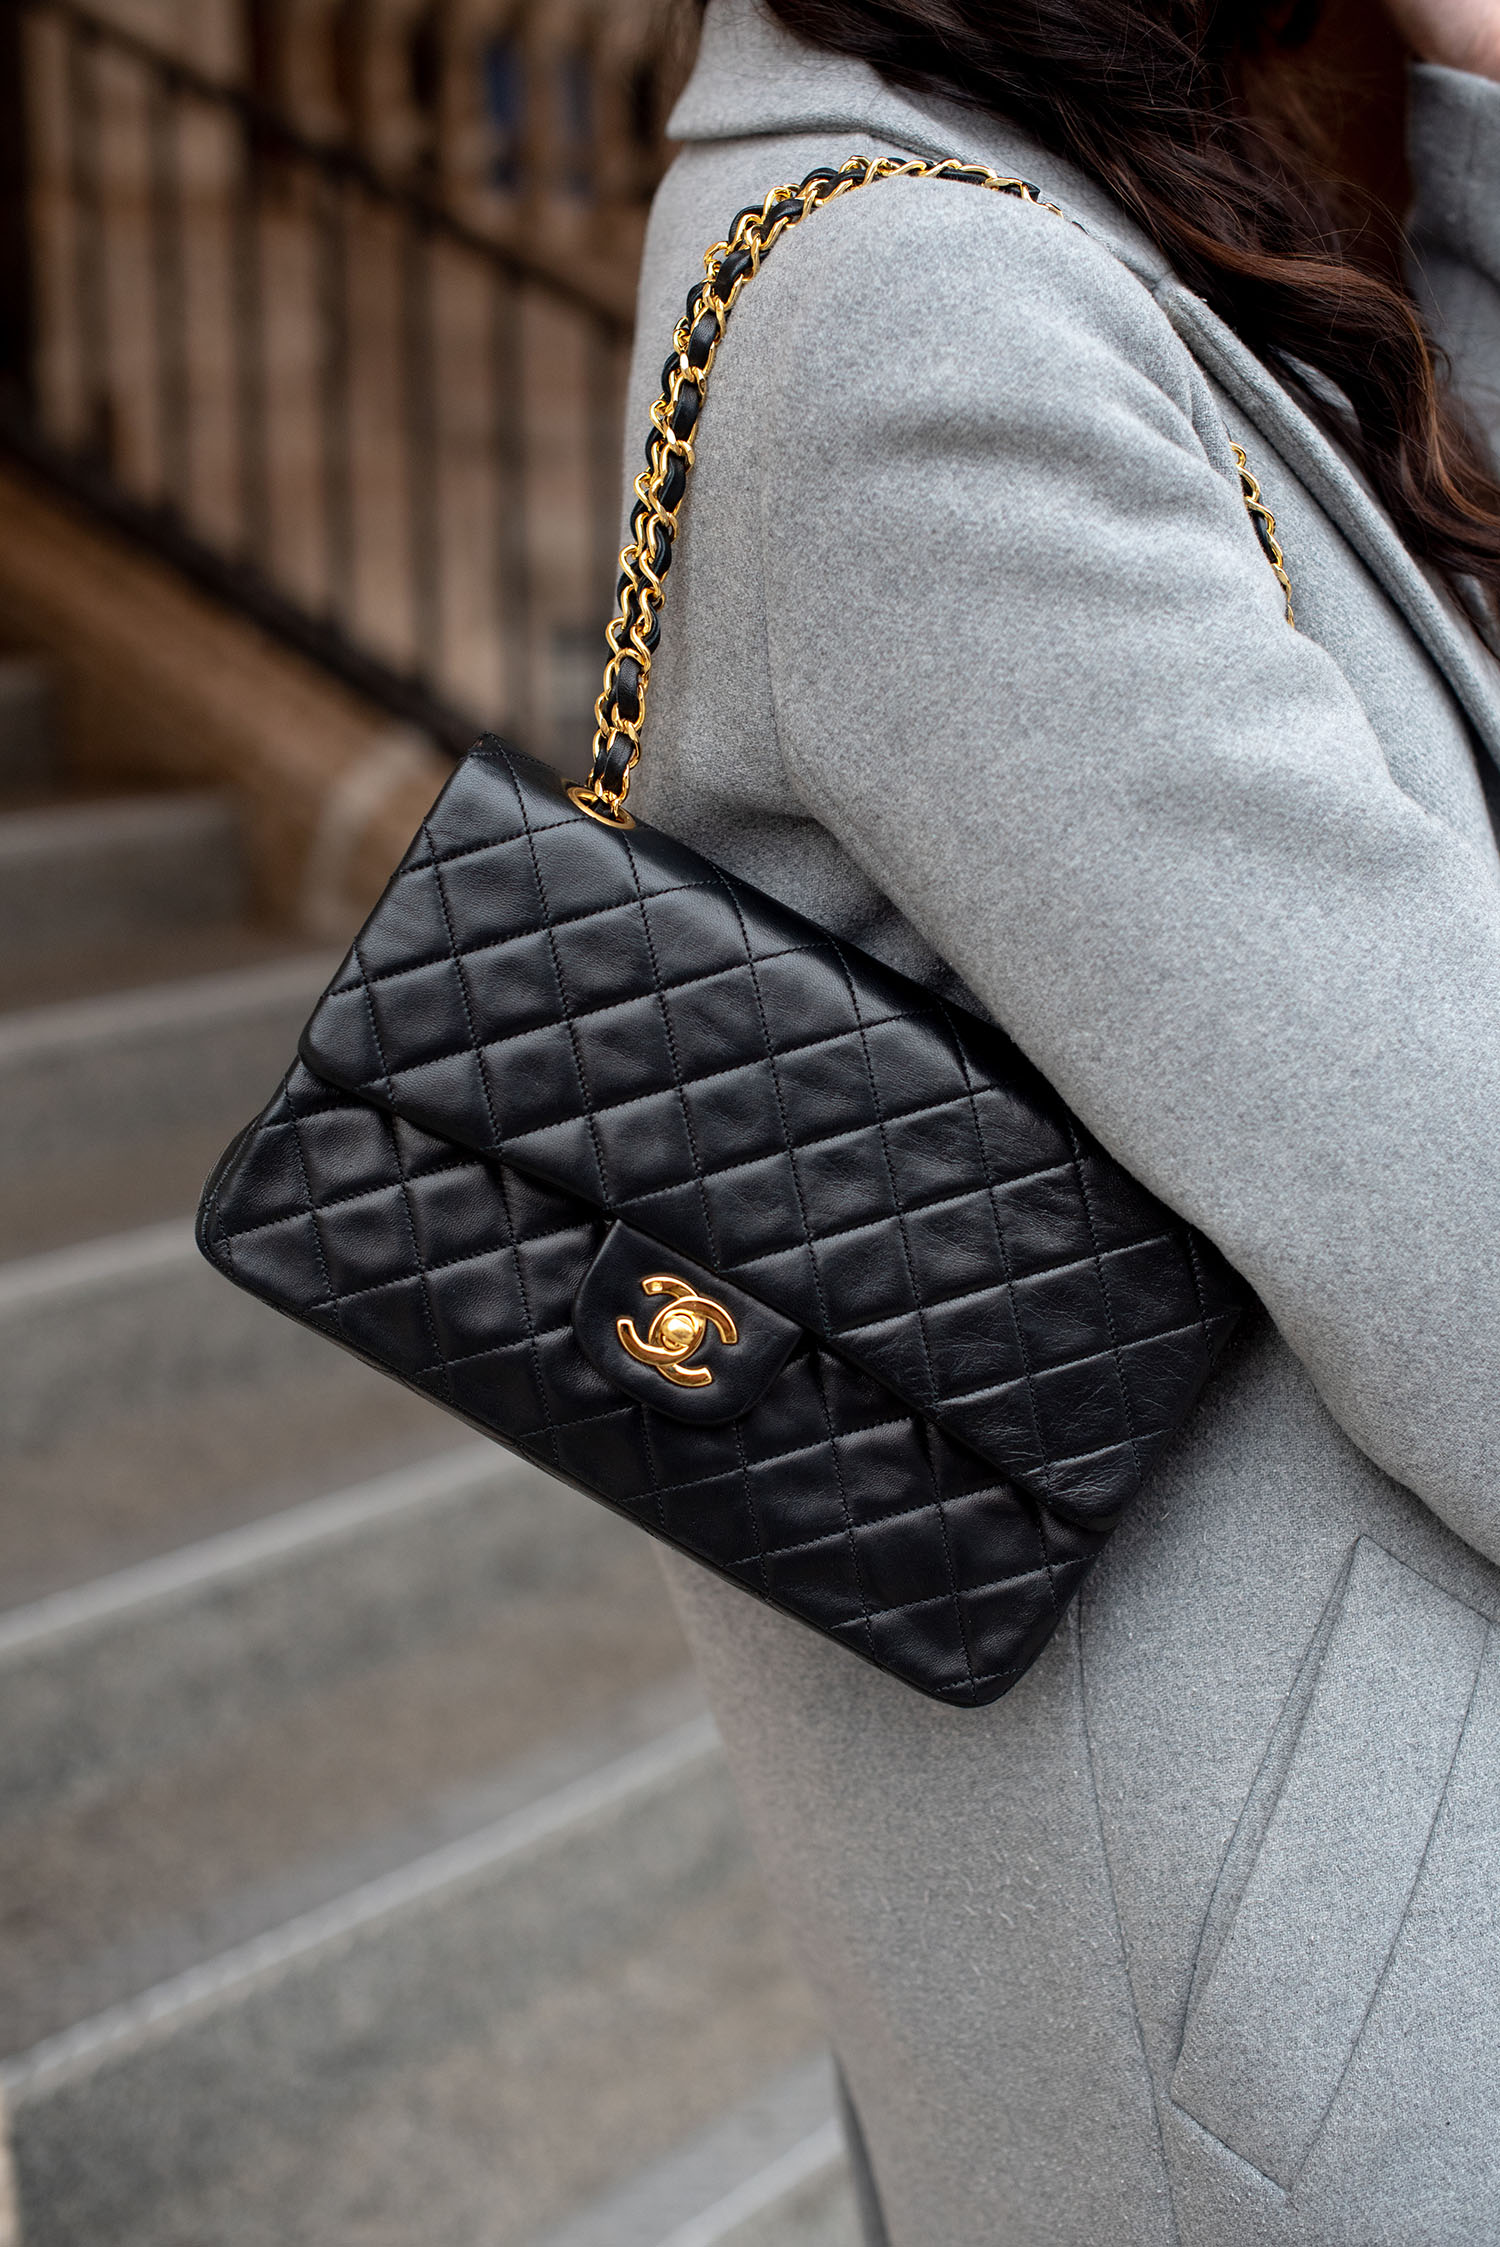 chanel quilted leather handbag